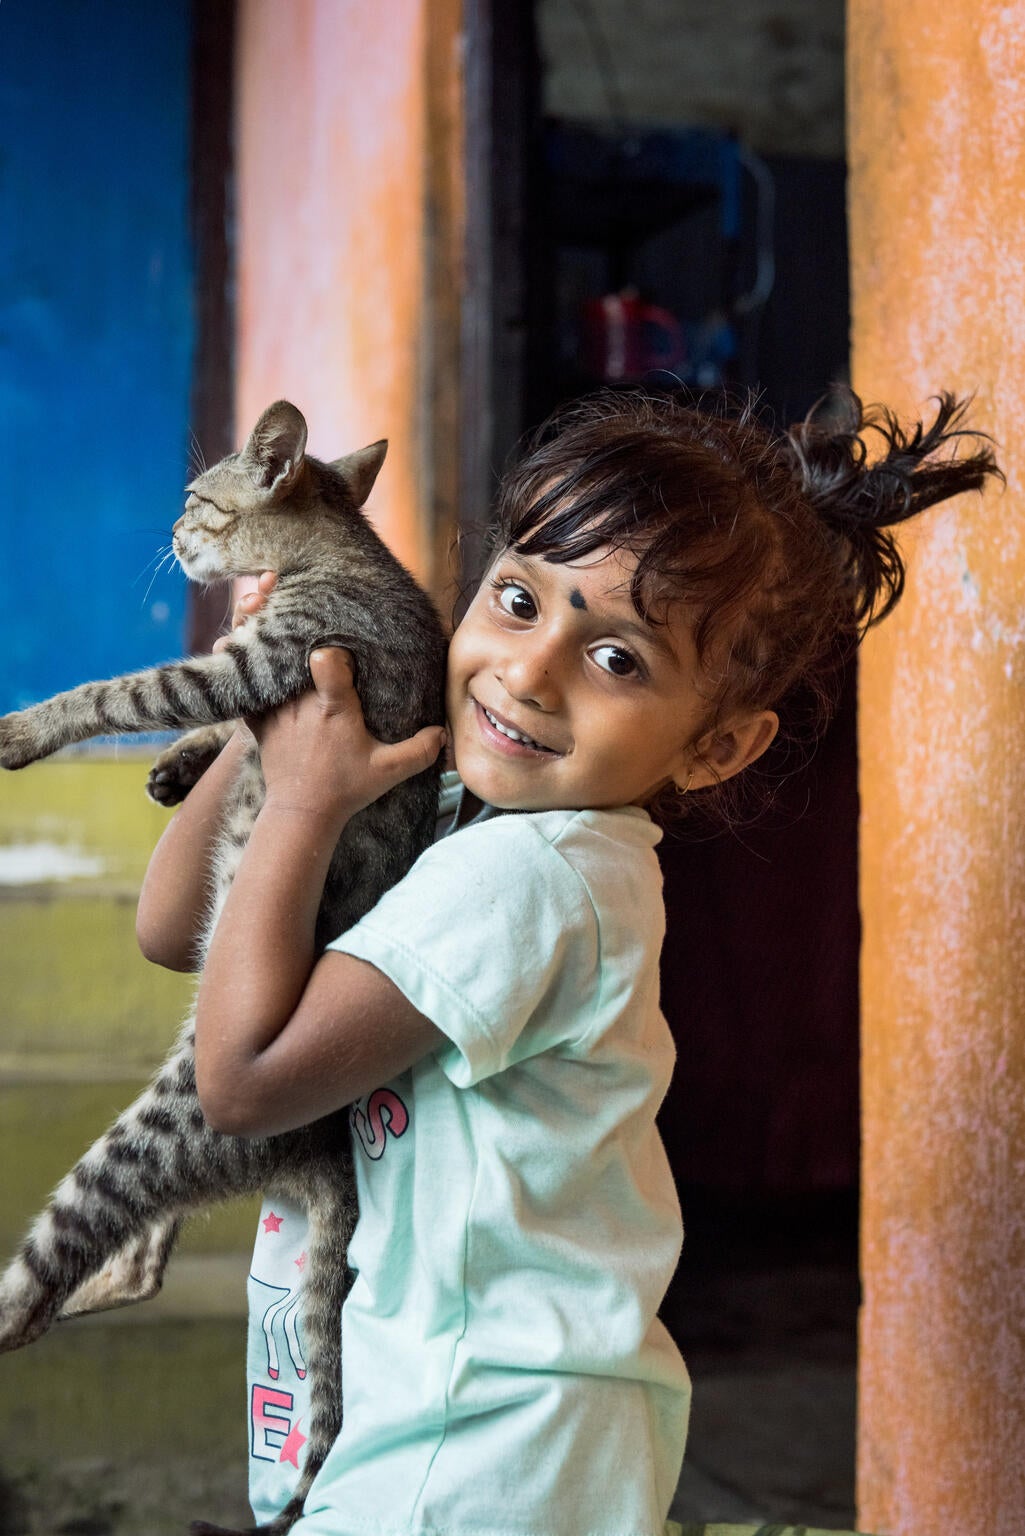 A young girl is holding a cat.